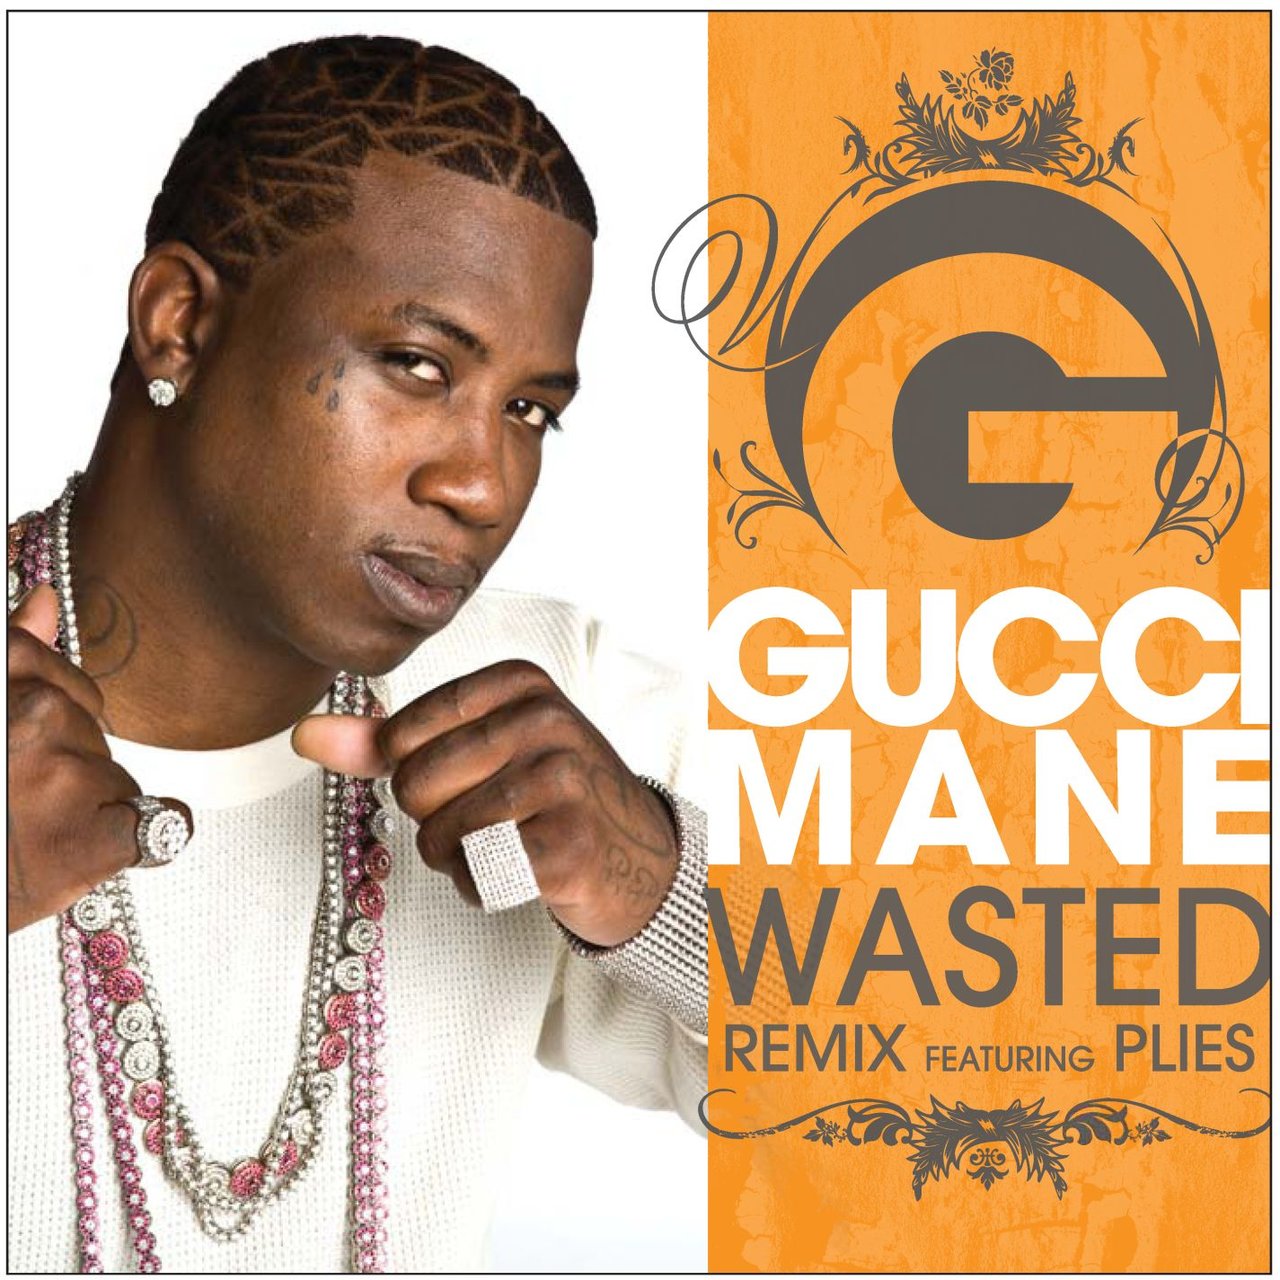 Wasted (feat. Plies) (Remix) [2009]